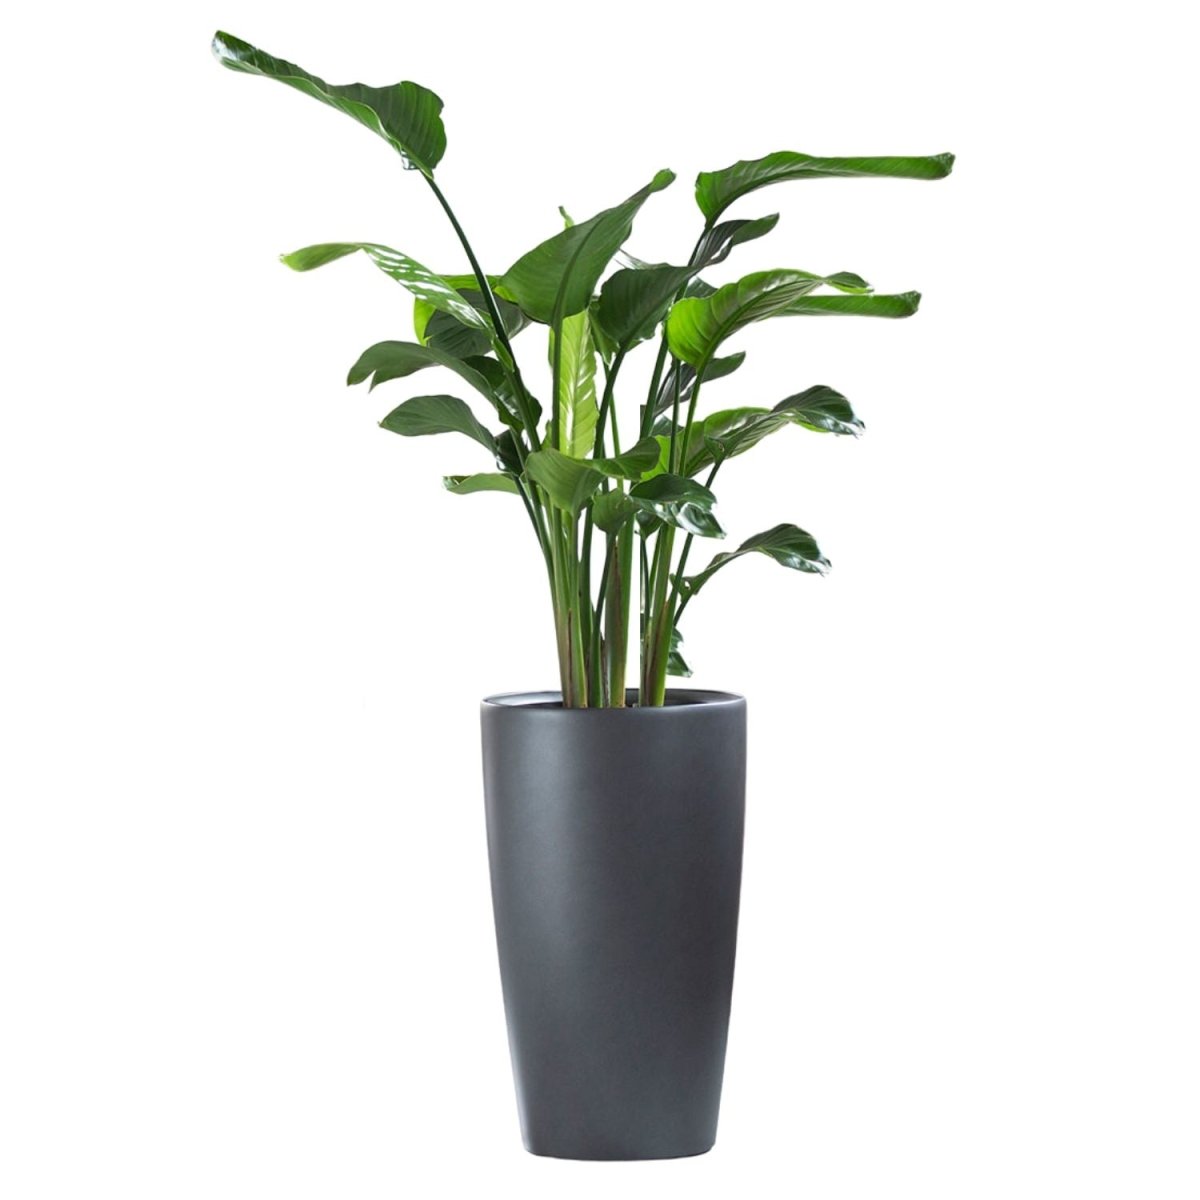 Bird of Paradise Plant Potted In Lechuza Rondo Planter - Charcoal Metallic - My City Plants